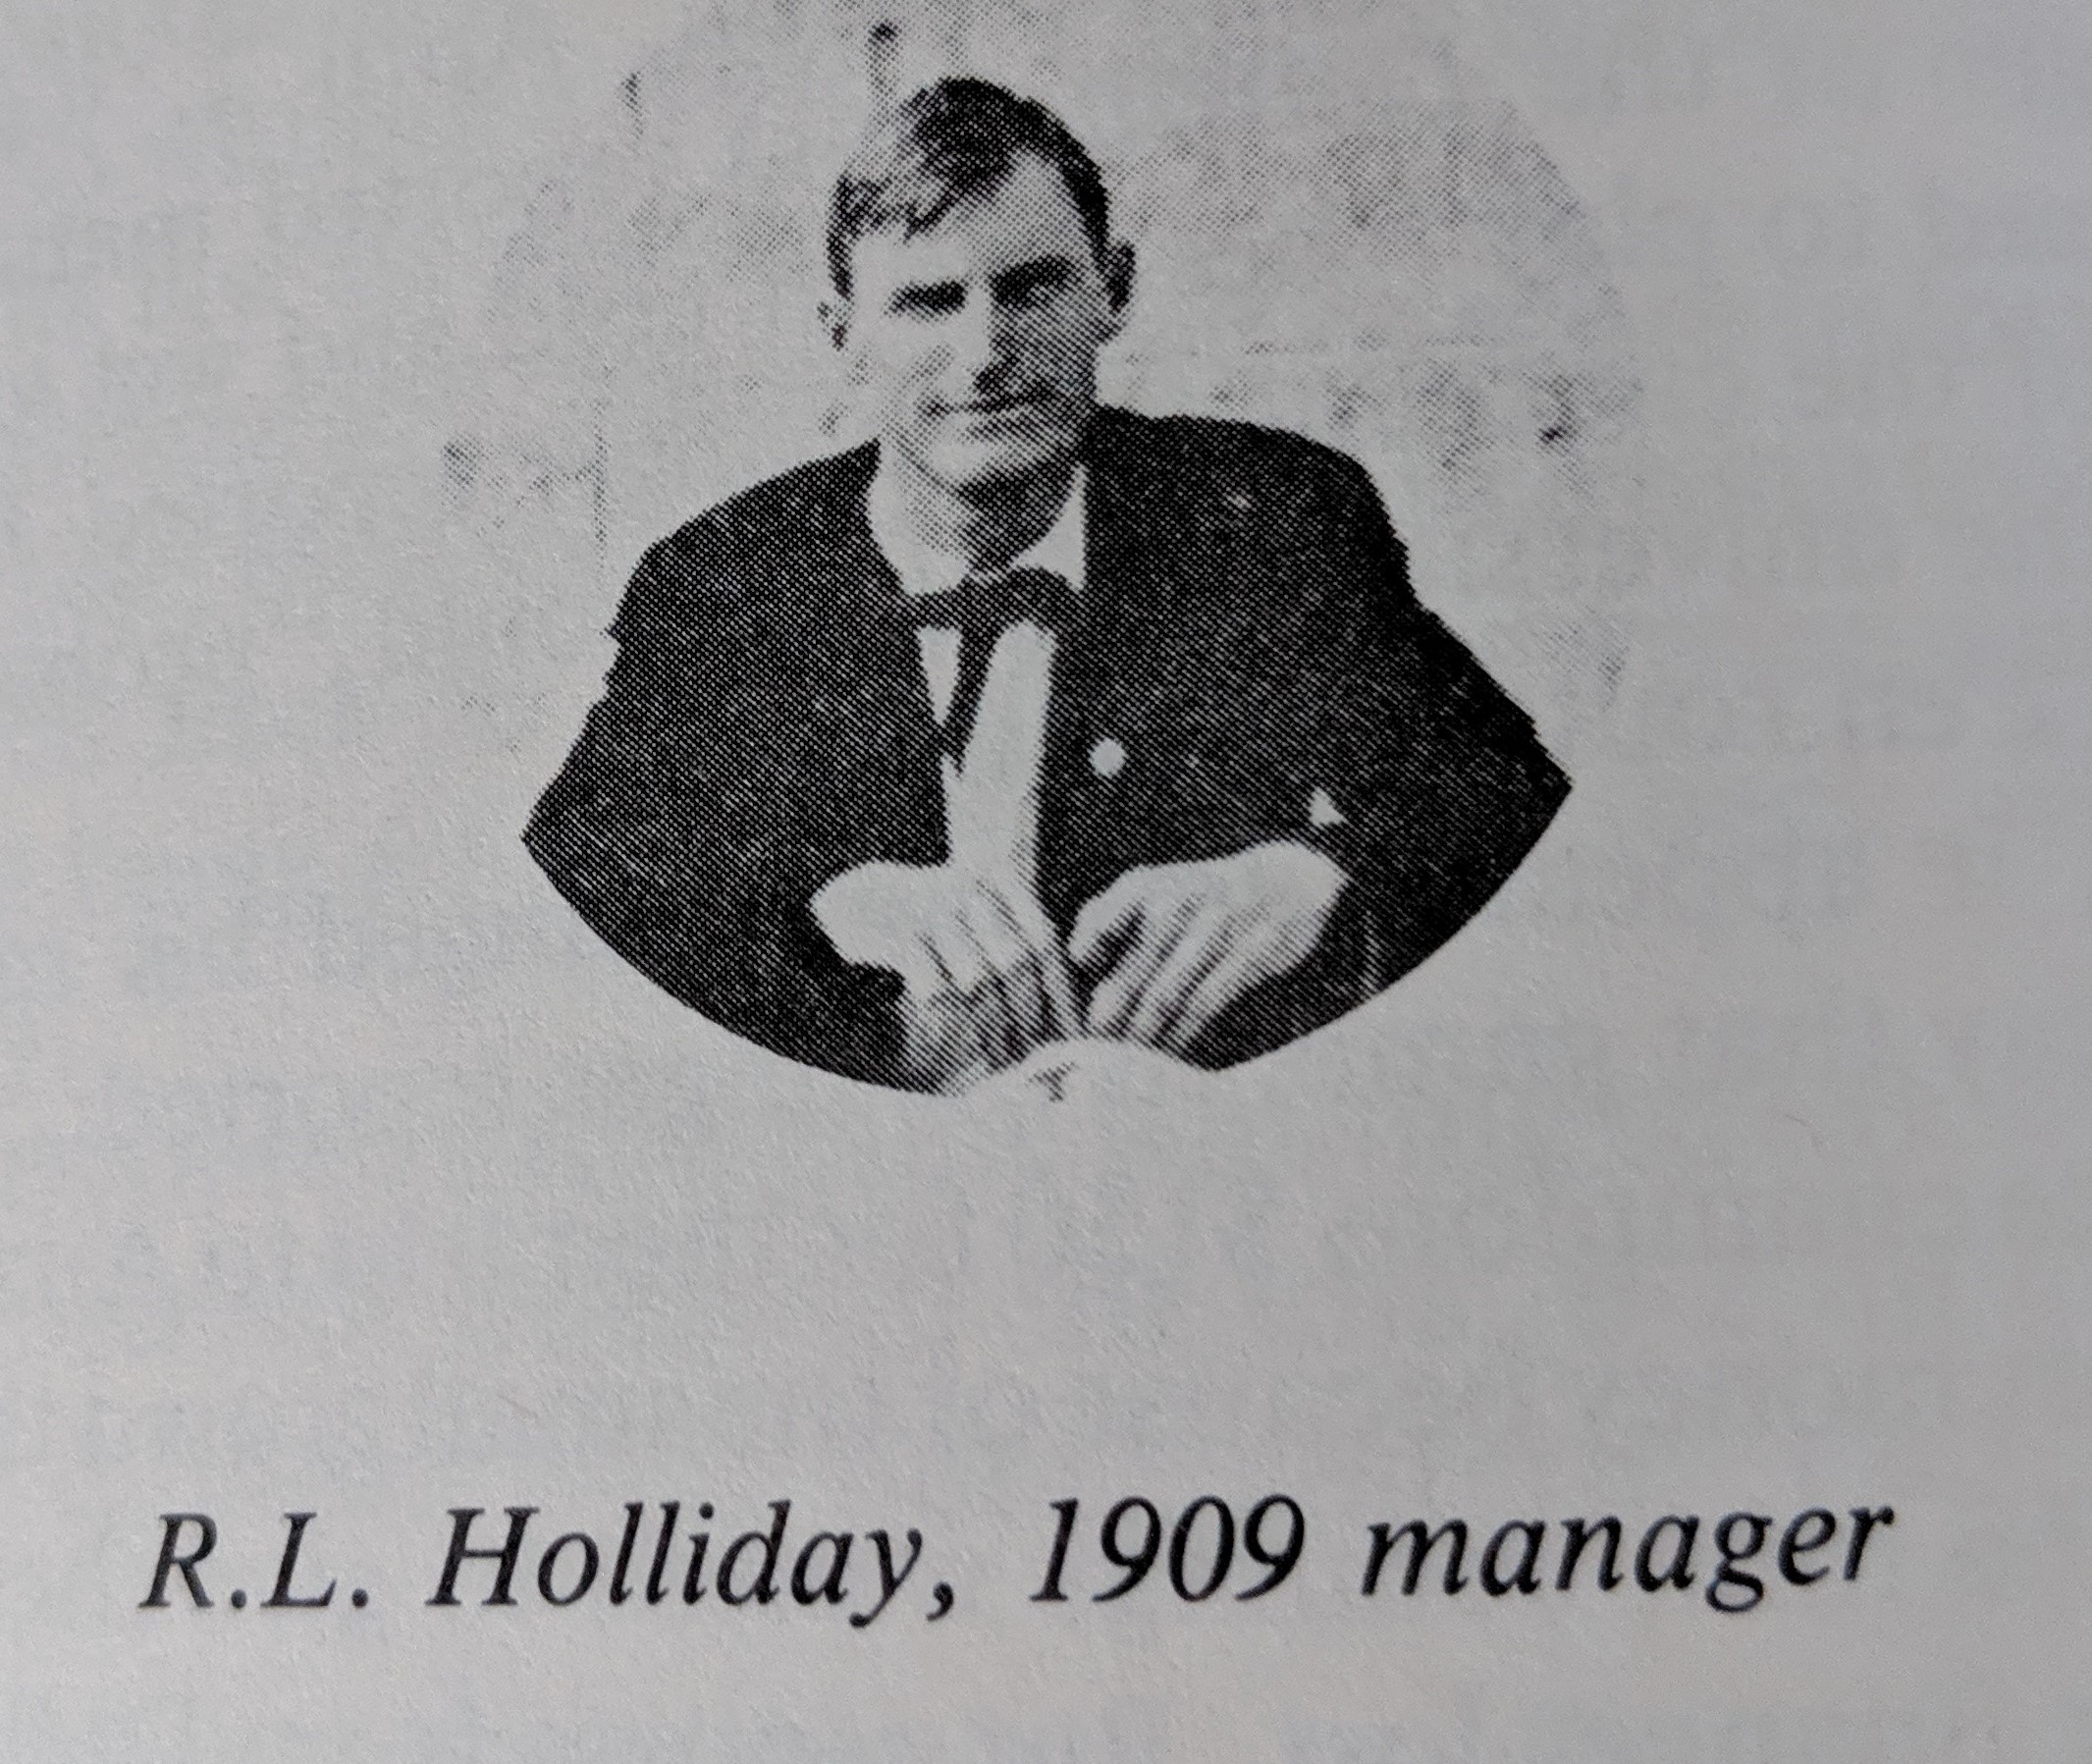  Robert Holliday was the manager and became a member of the U.T. Board of Regents in 1927. 